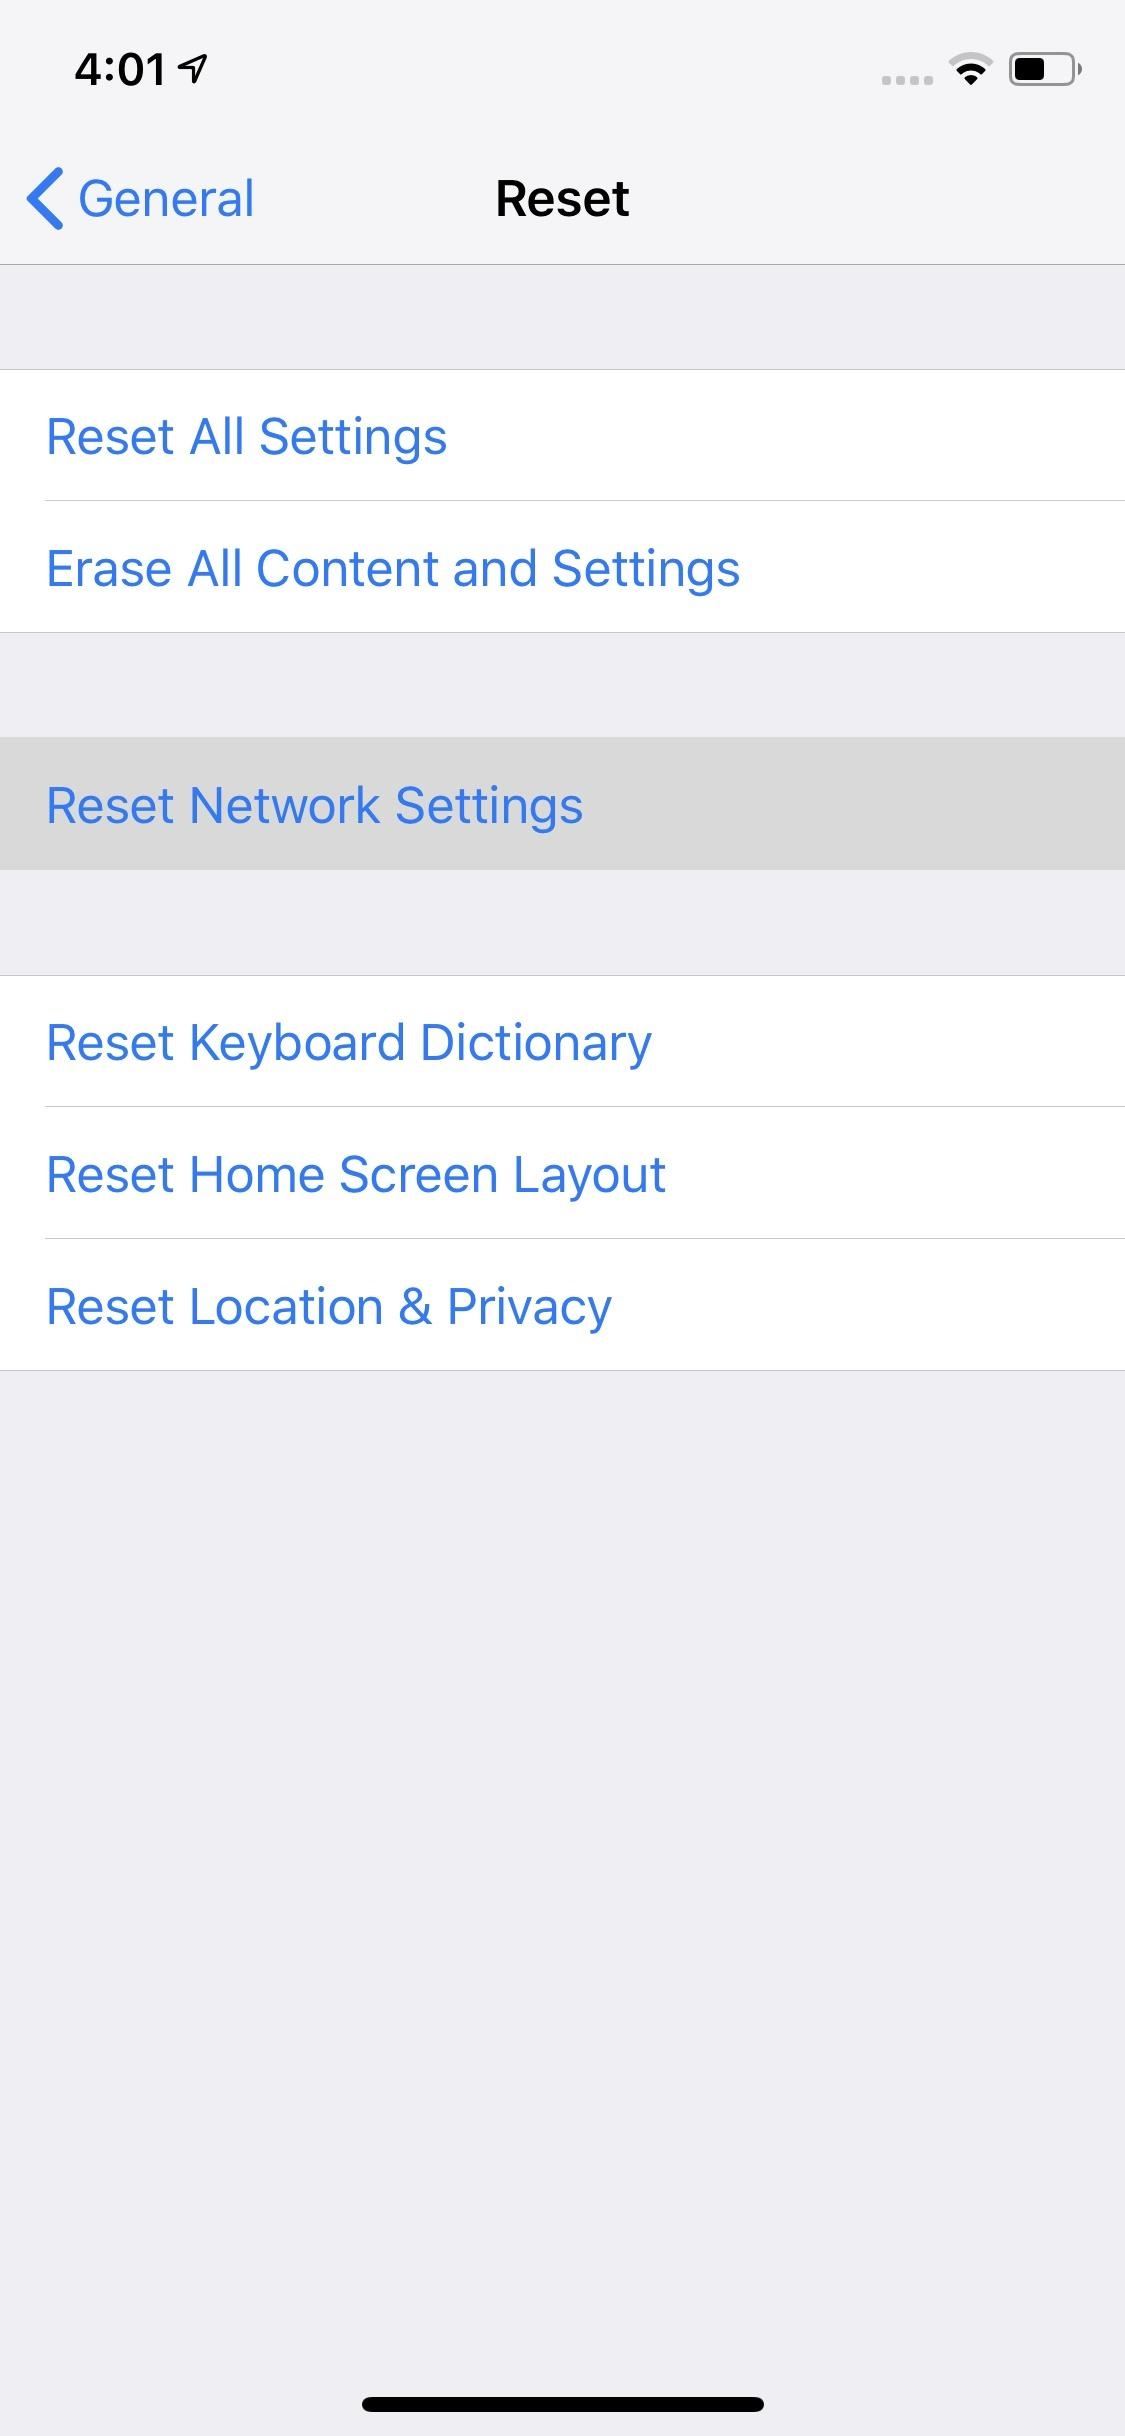 iOS Security: How to Untrust Computers Your iPhone Previously Connected To So They Can't Access Your Private Data